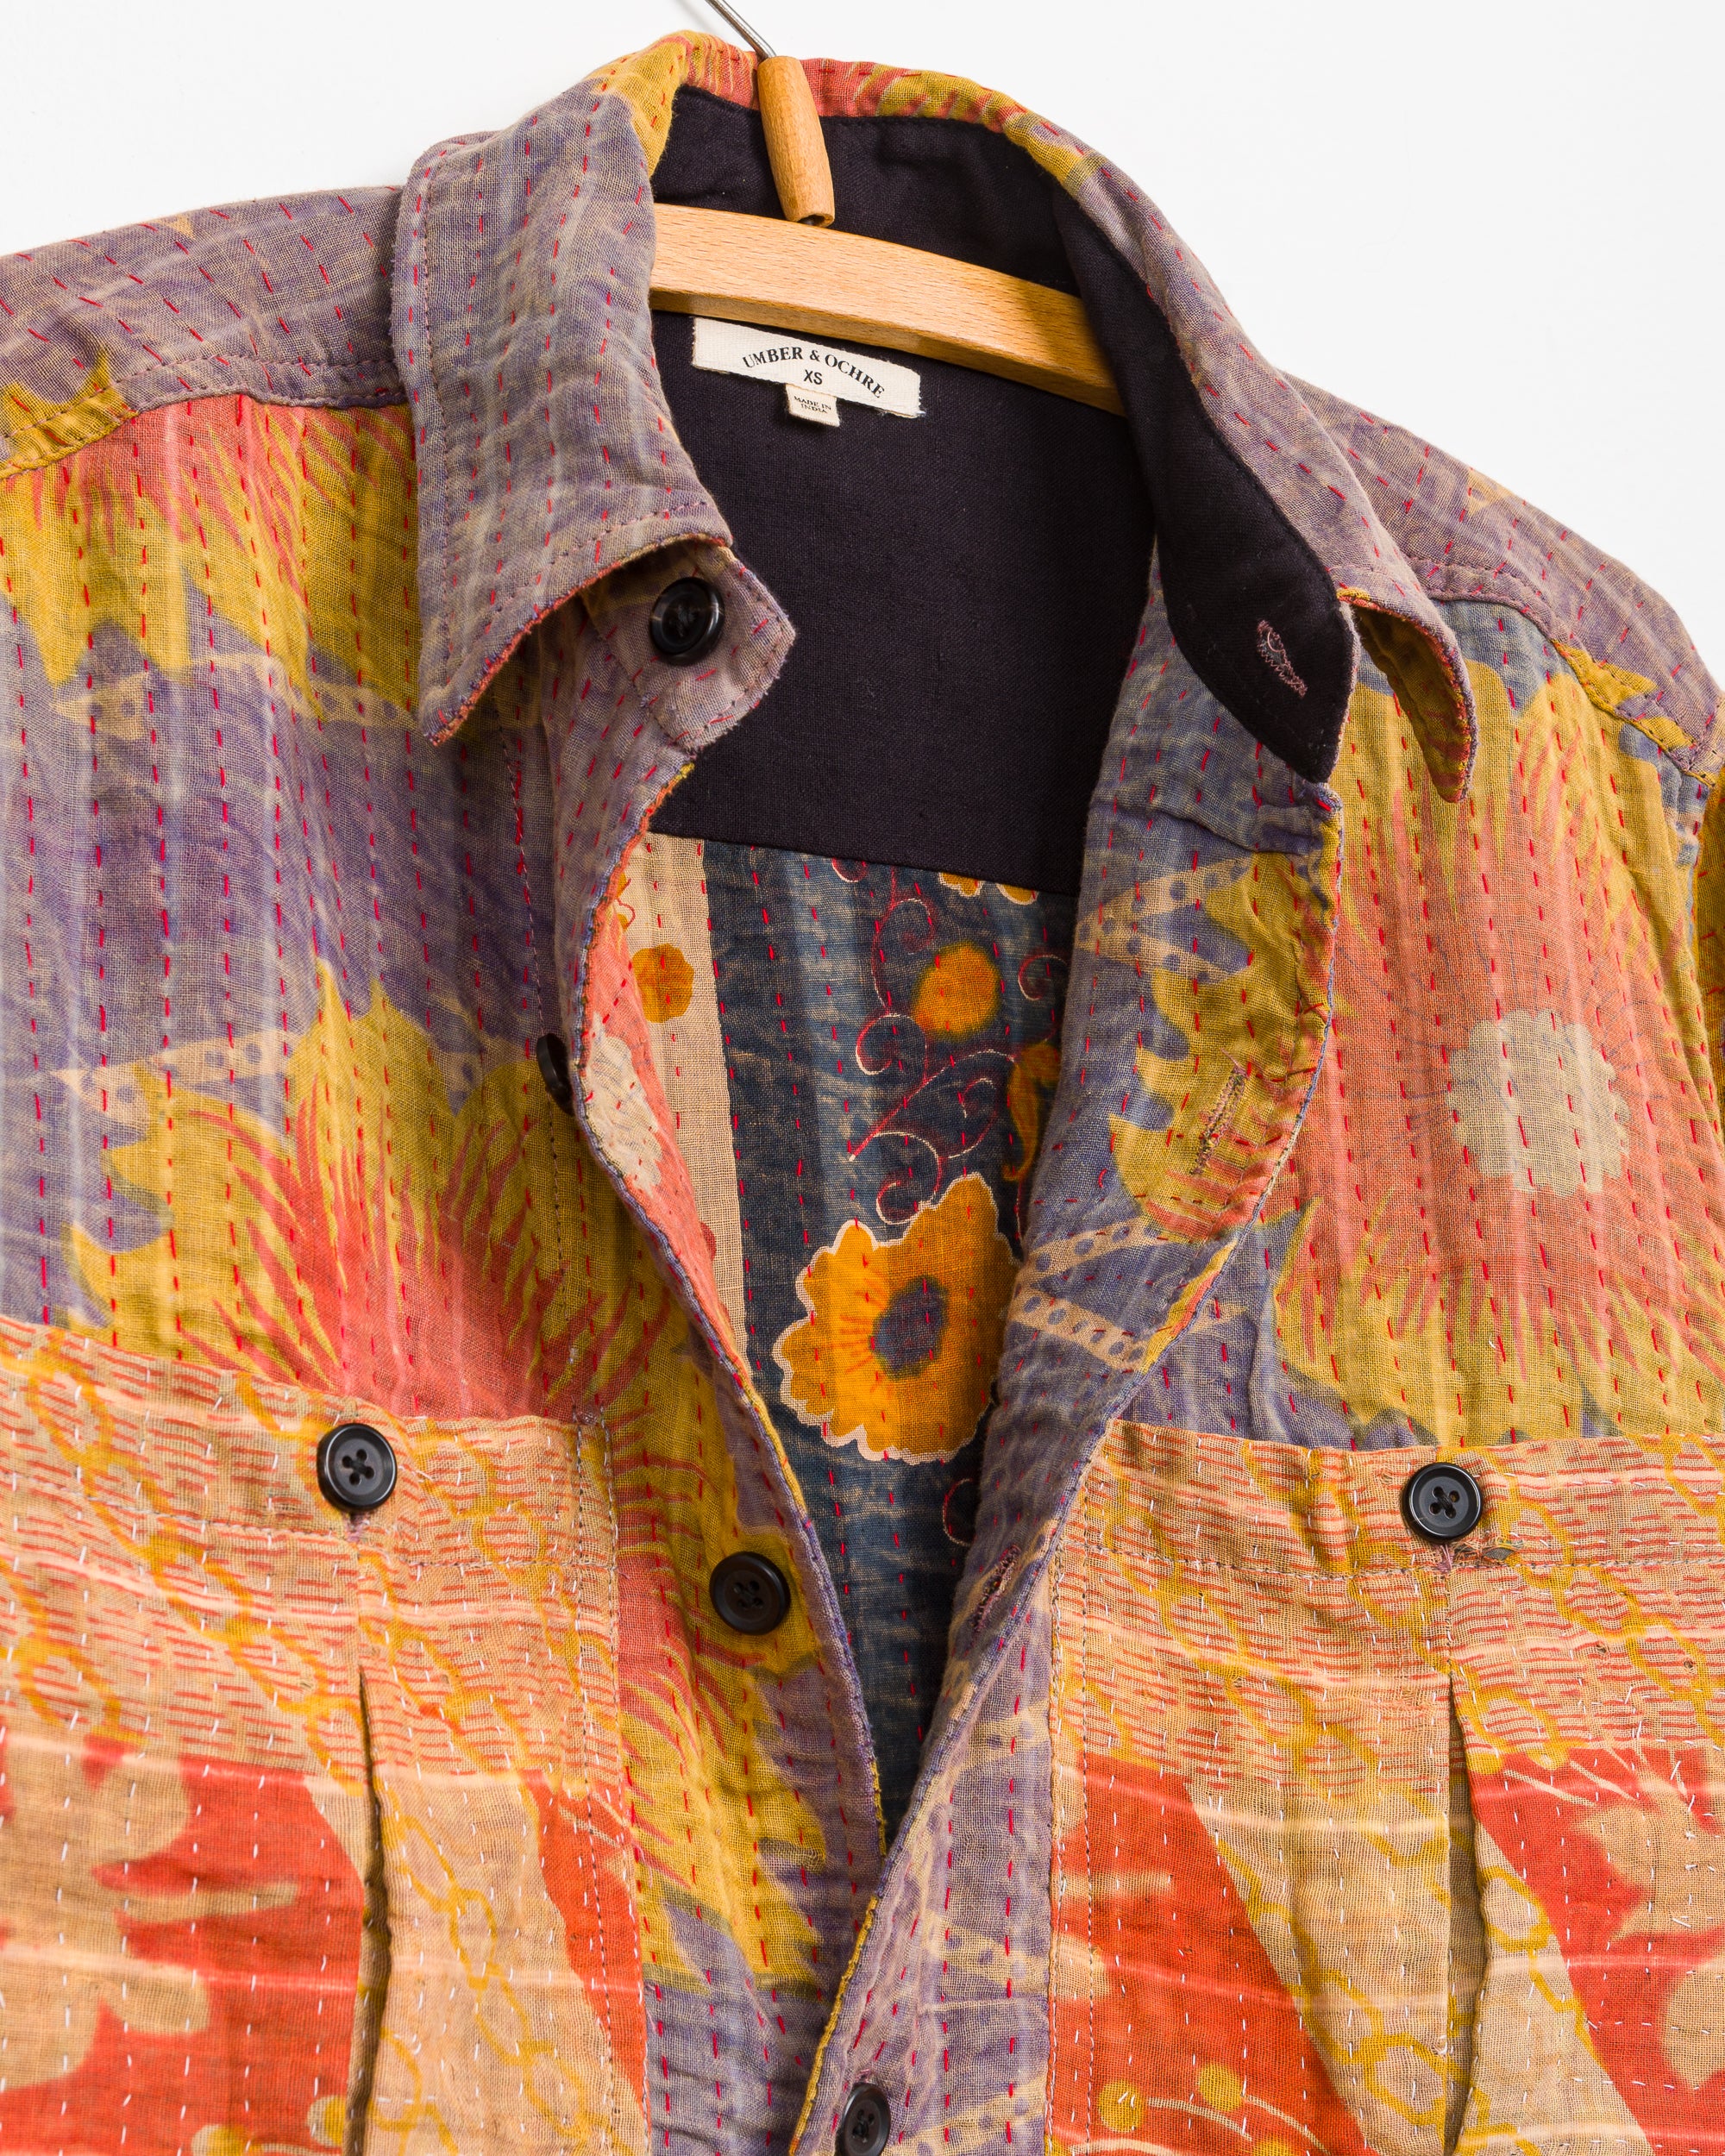 Vivek Overshirt in Quilted Kantha - XS